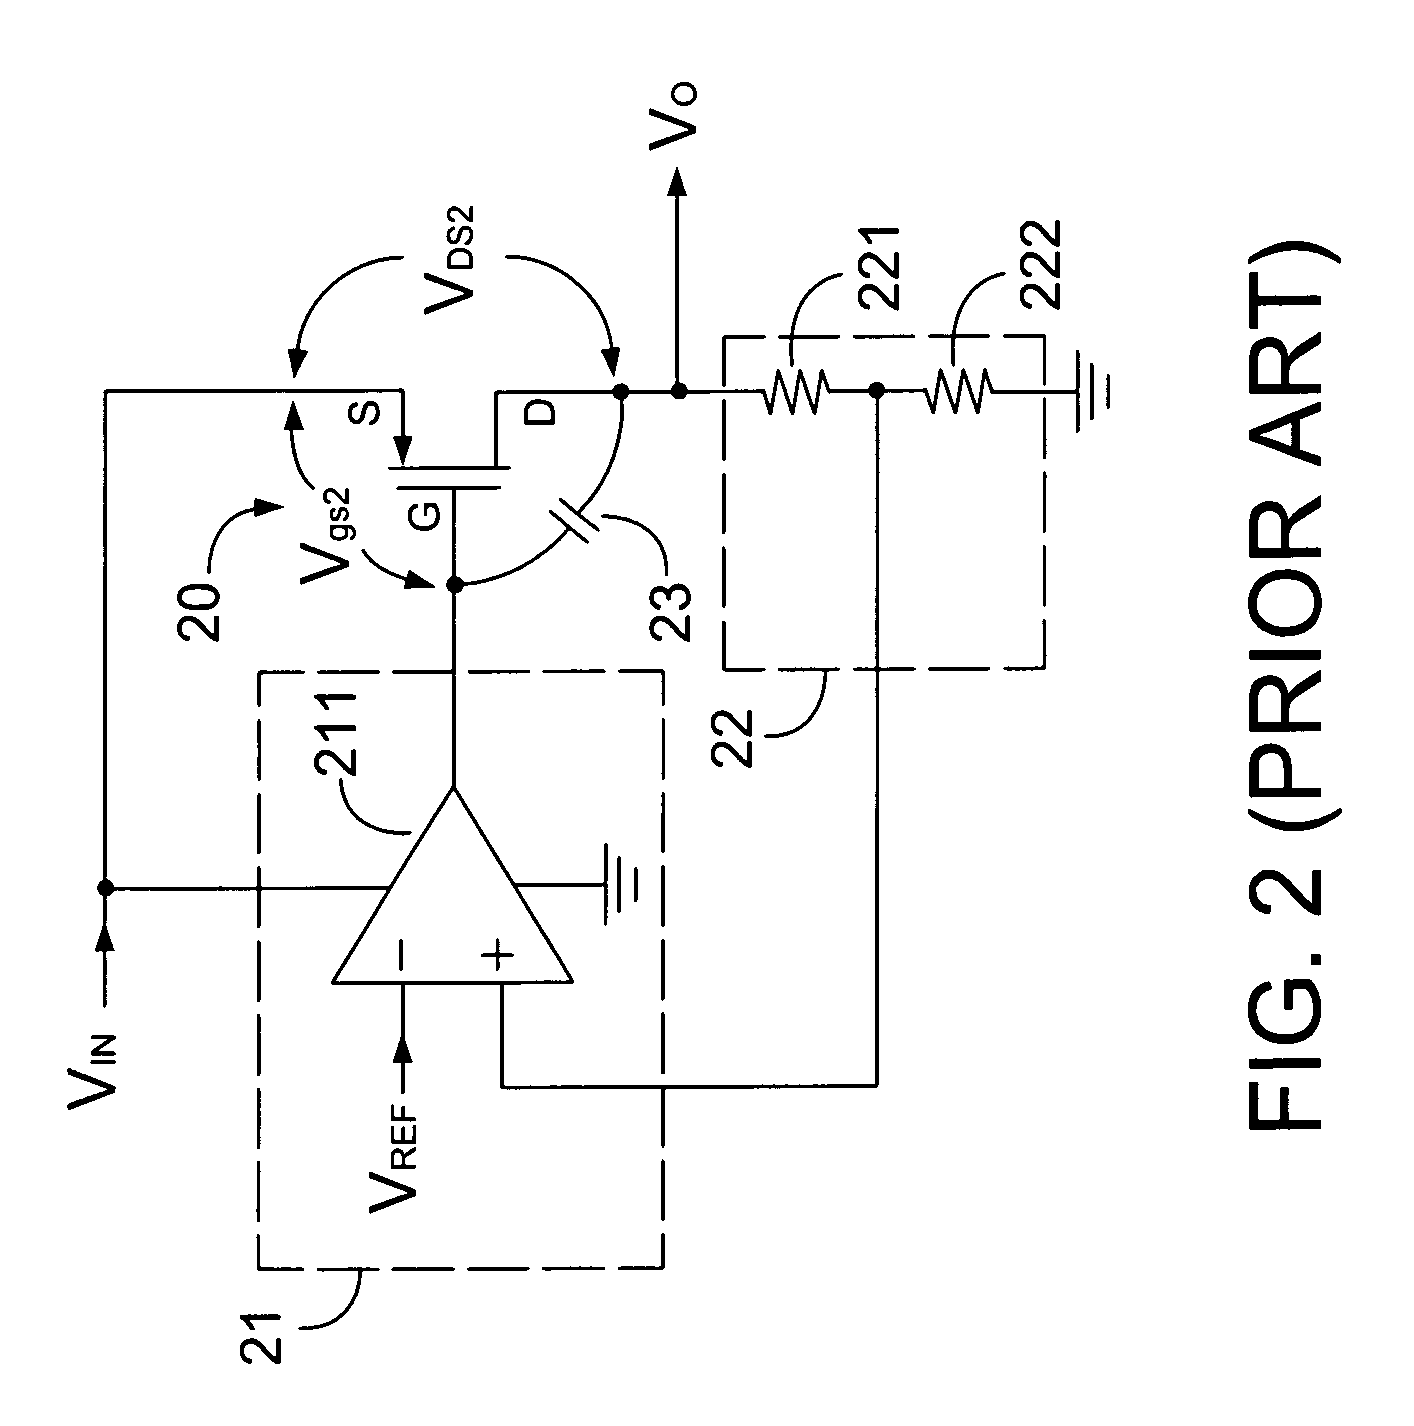 Low dropout regulator with wide input voltage range